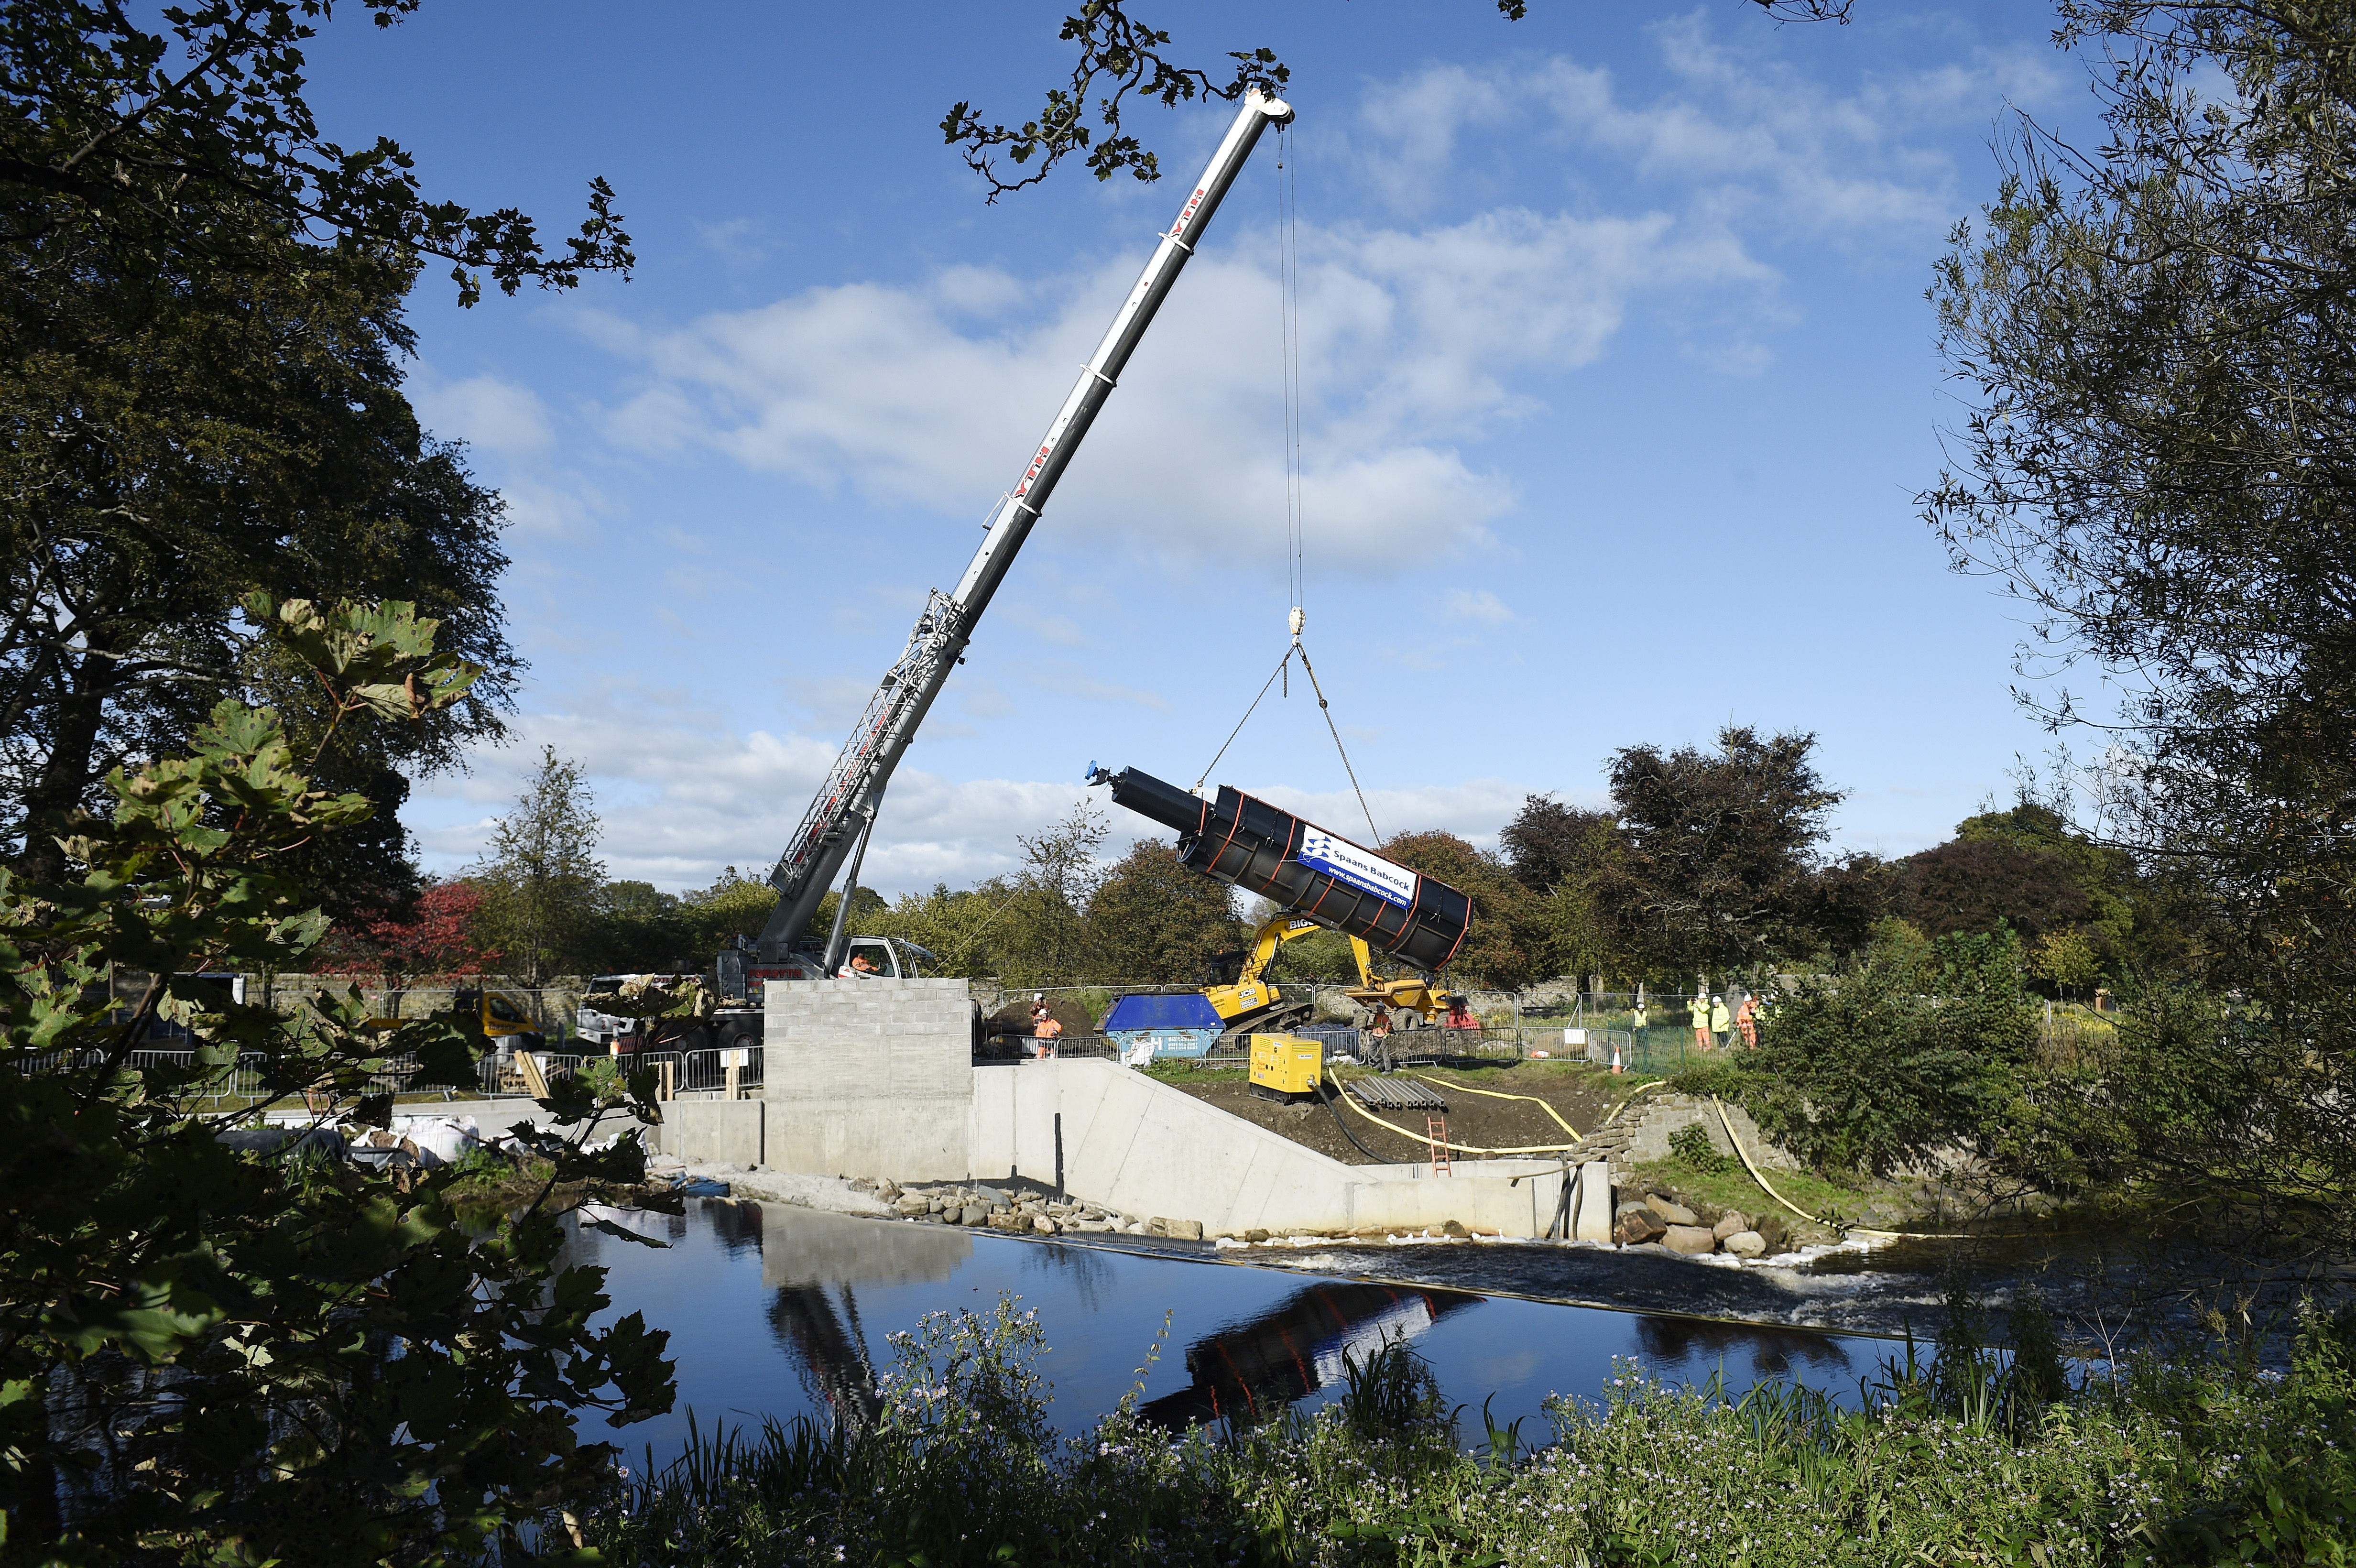 In Pictures: Archimedes screw hoisted into place at Saughton Park micro-hydro  scheme